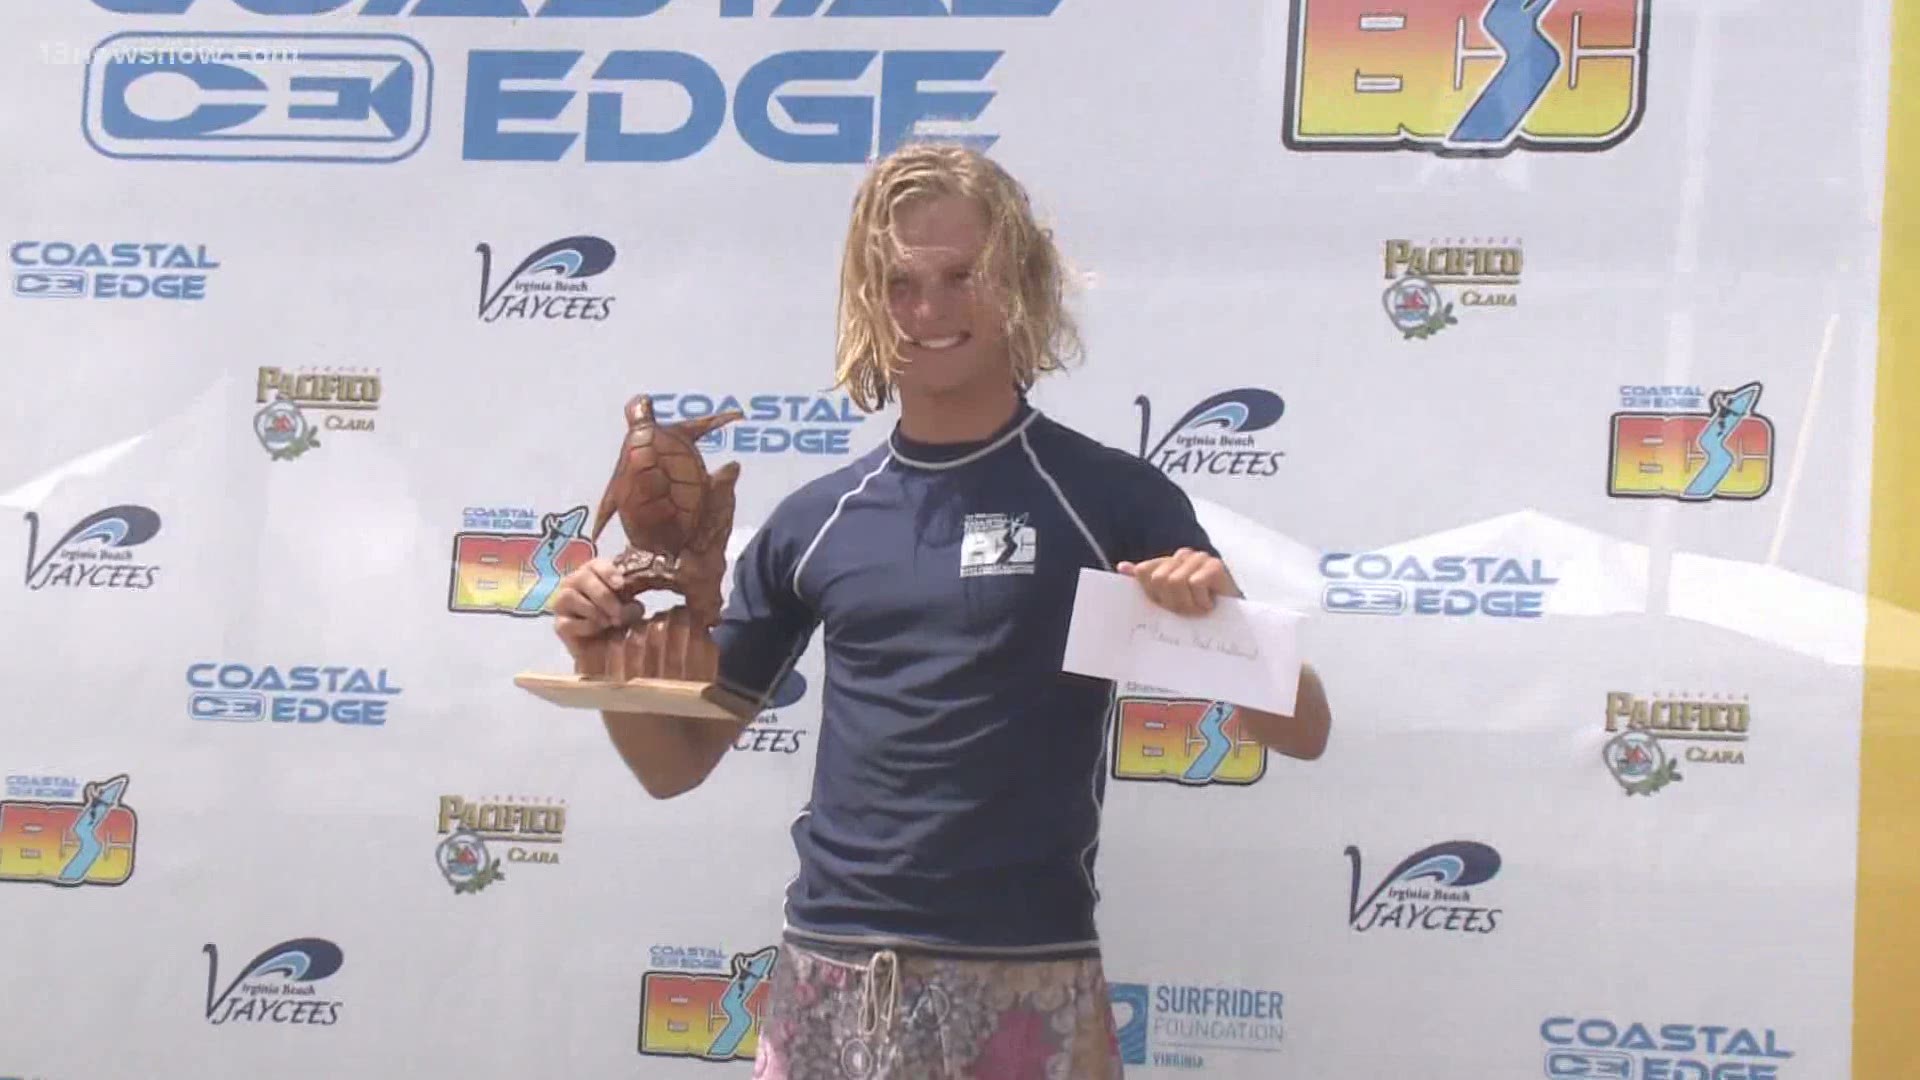 Trip Chandler had a late rally to top Beach native, Mike Melchiorre to win the ECSC Longboard title.